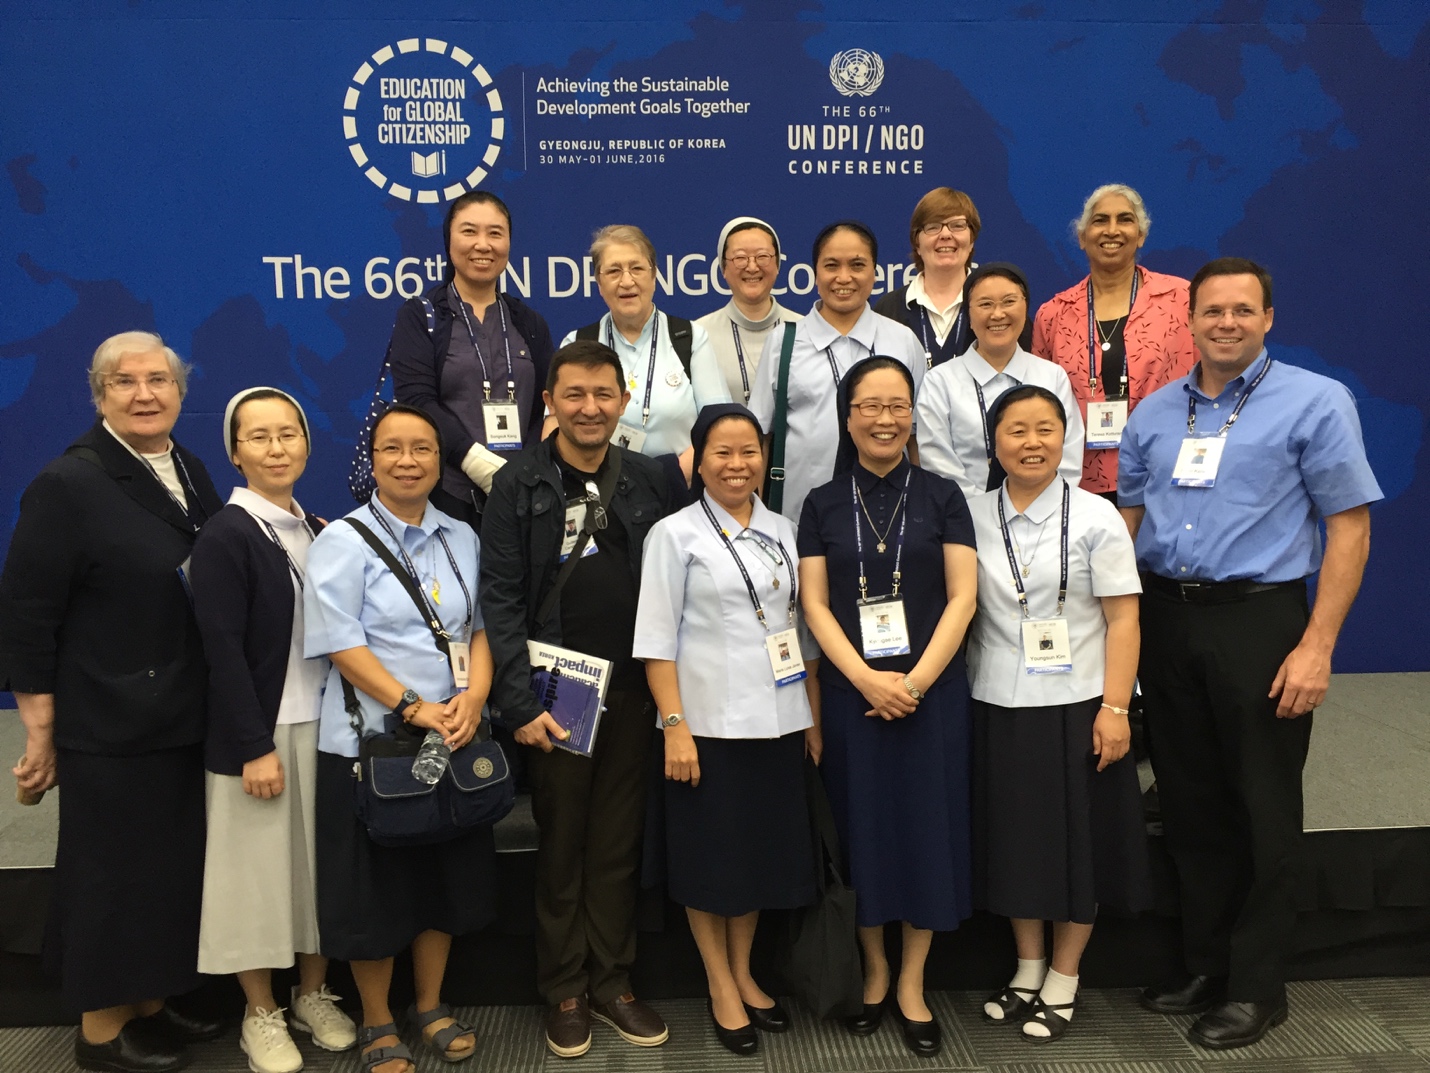 Vincentian Family Members at the UN DPI/NGO Conference in Gyeongju, S. Korea - 19 participants from S. Korea, Philippines, France, Ireland, Colombia, United States and India